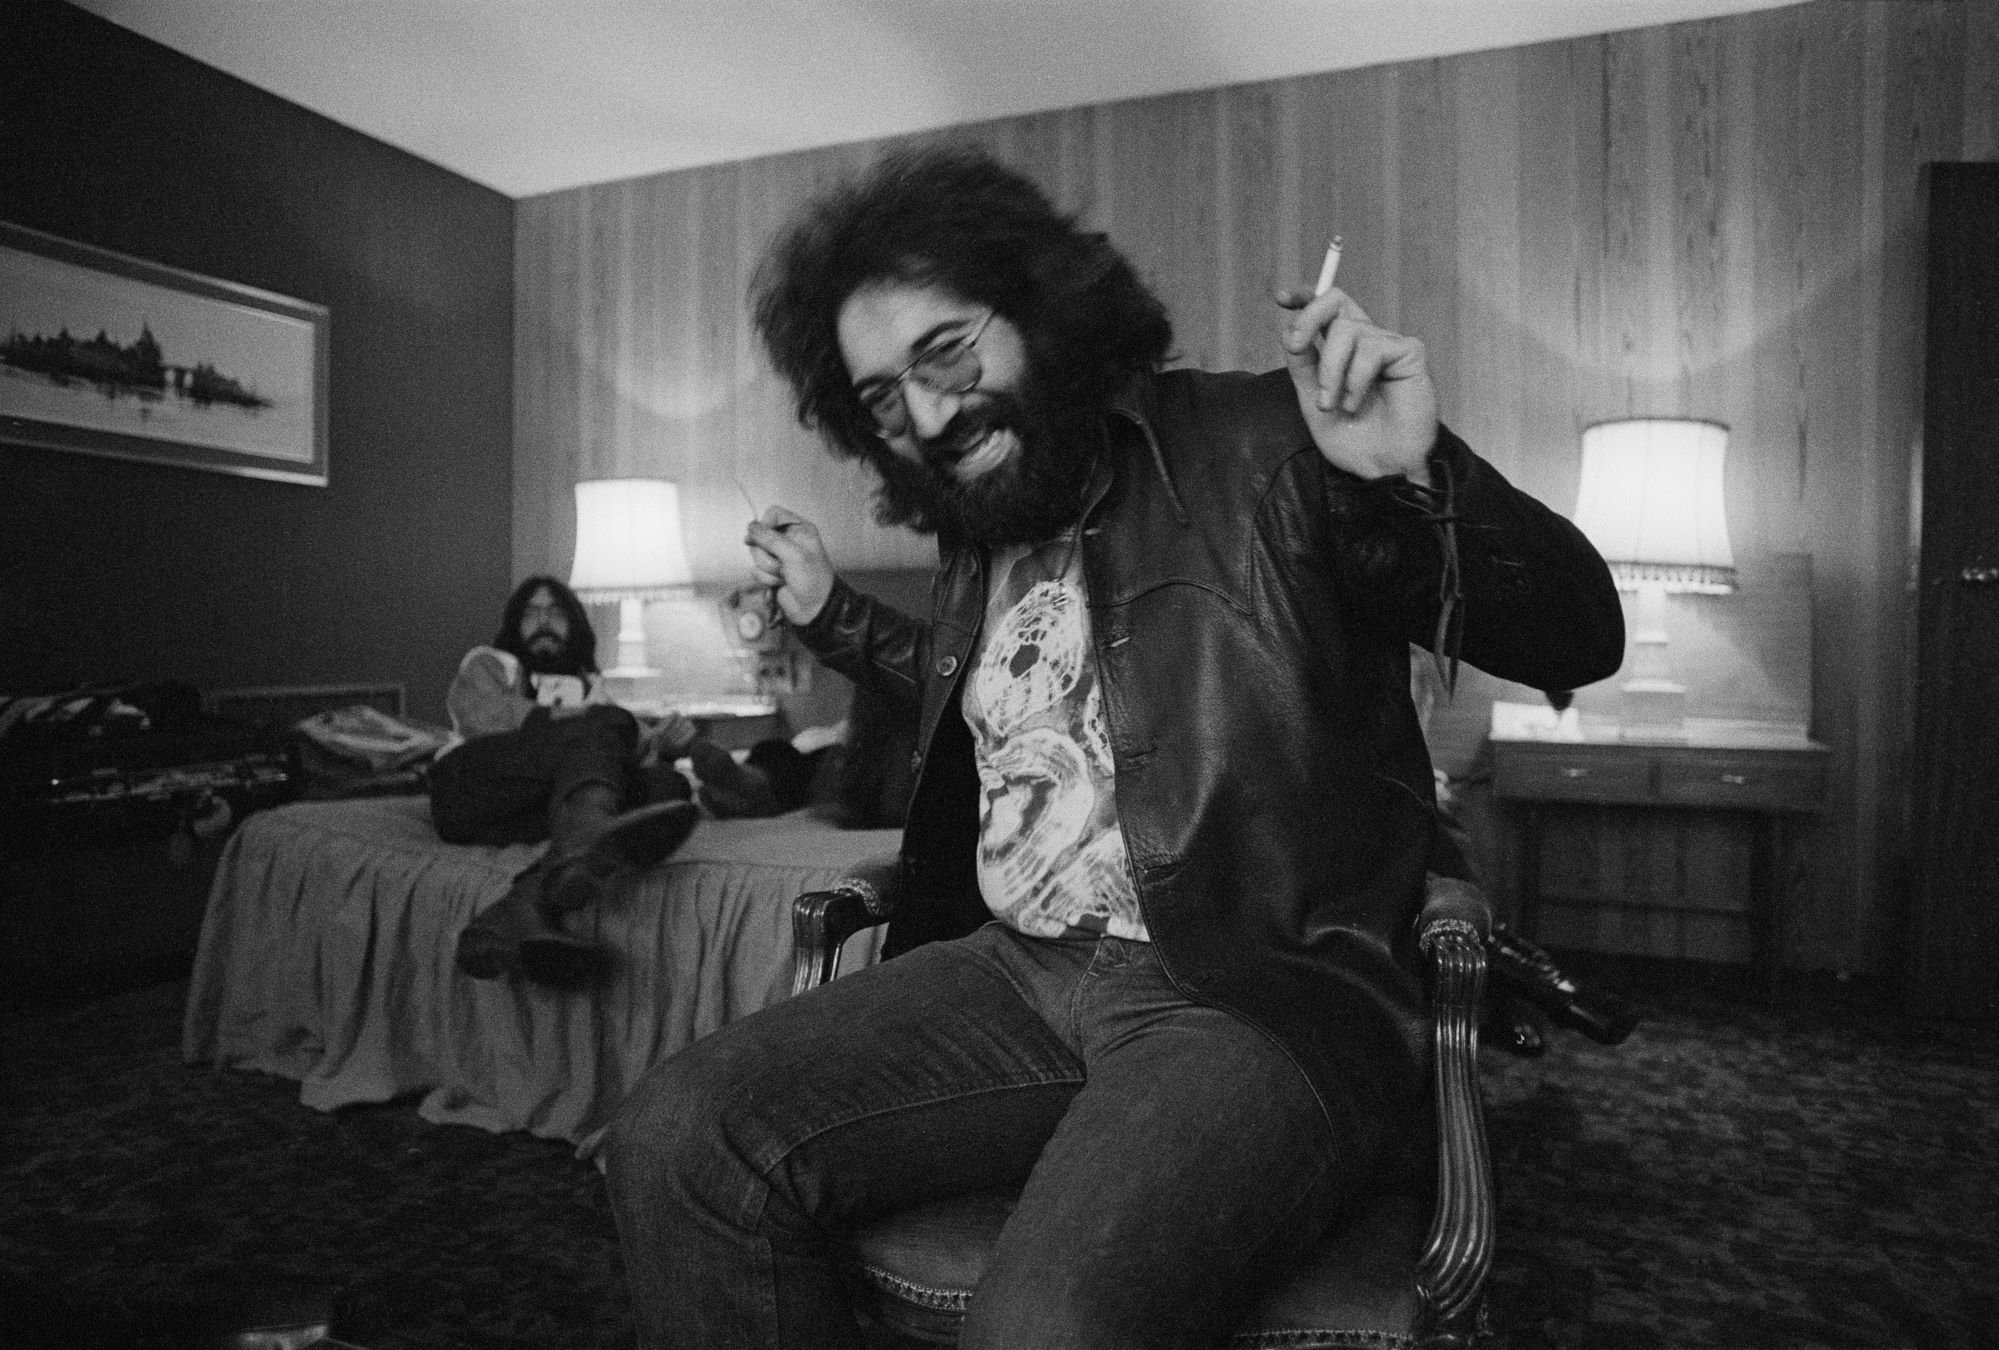 Jerry Garcia of the band The Grateful Dead in a London hotel